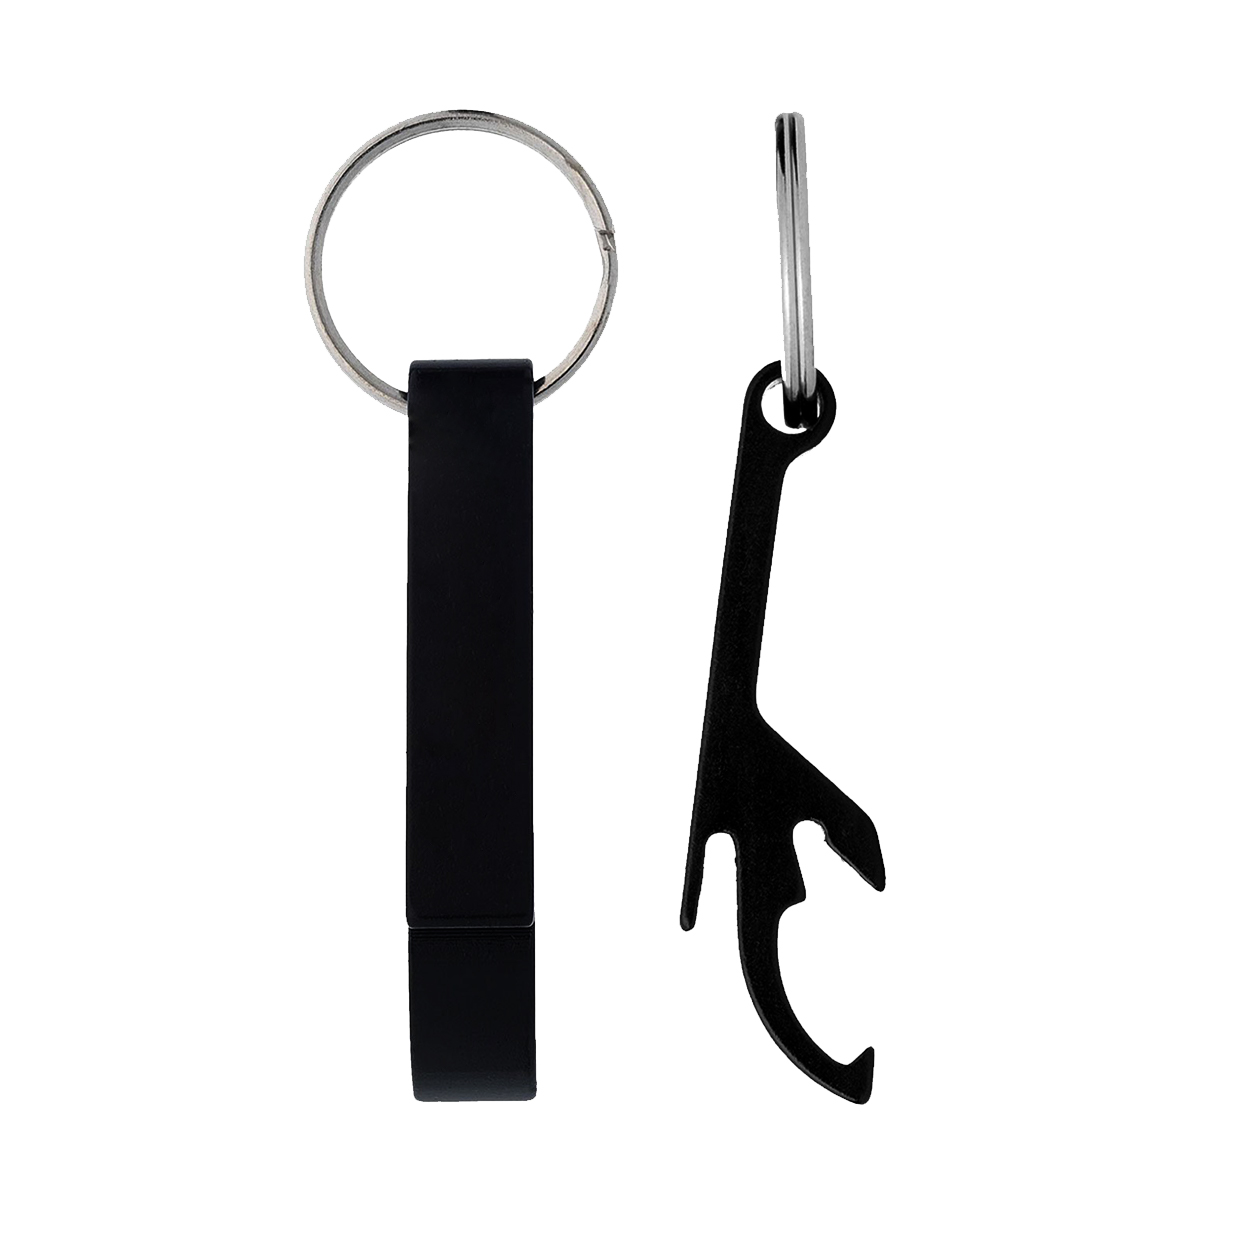 Product Details: Classic Bottle Opener Keychain Set of 2